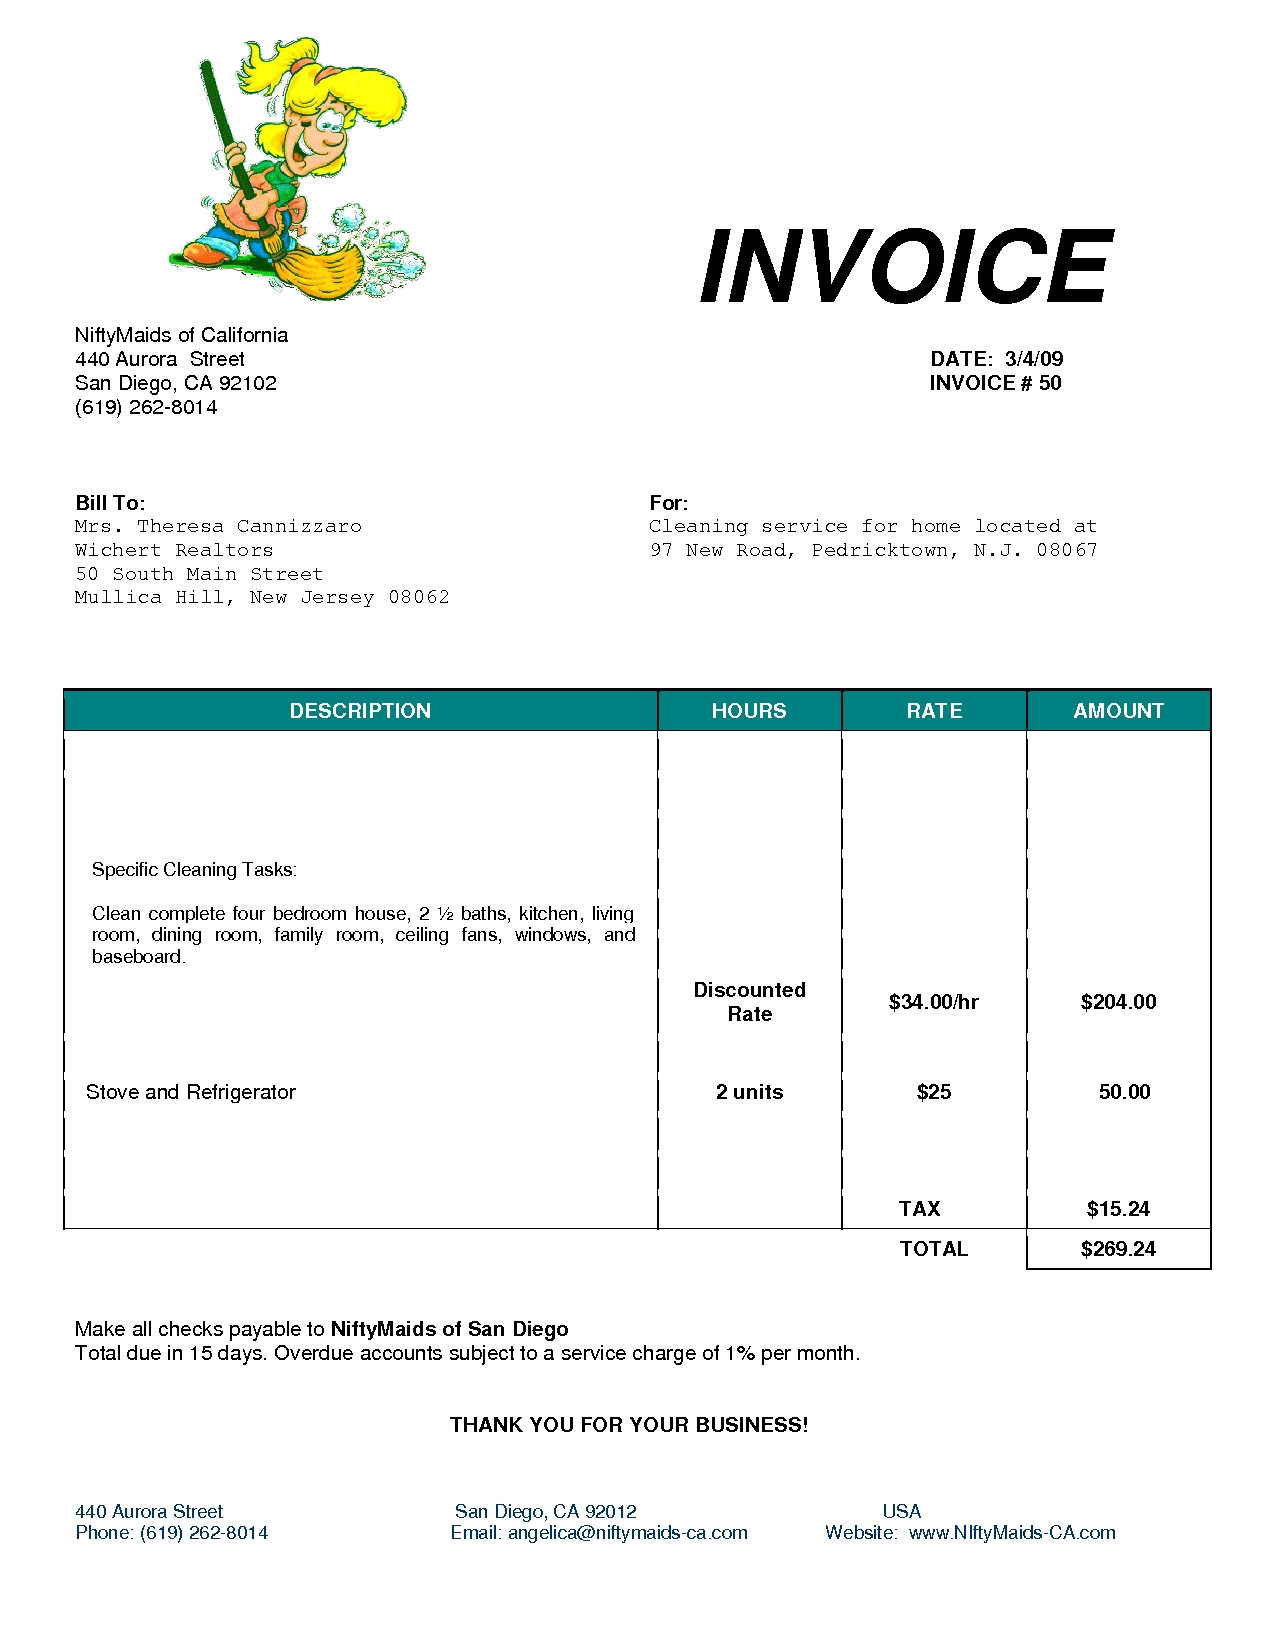 bhouseb bcleaningb bhouseb invoice free house cleaning receipt